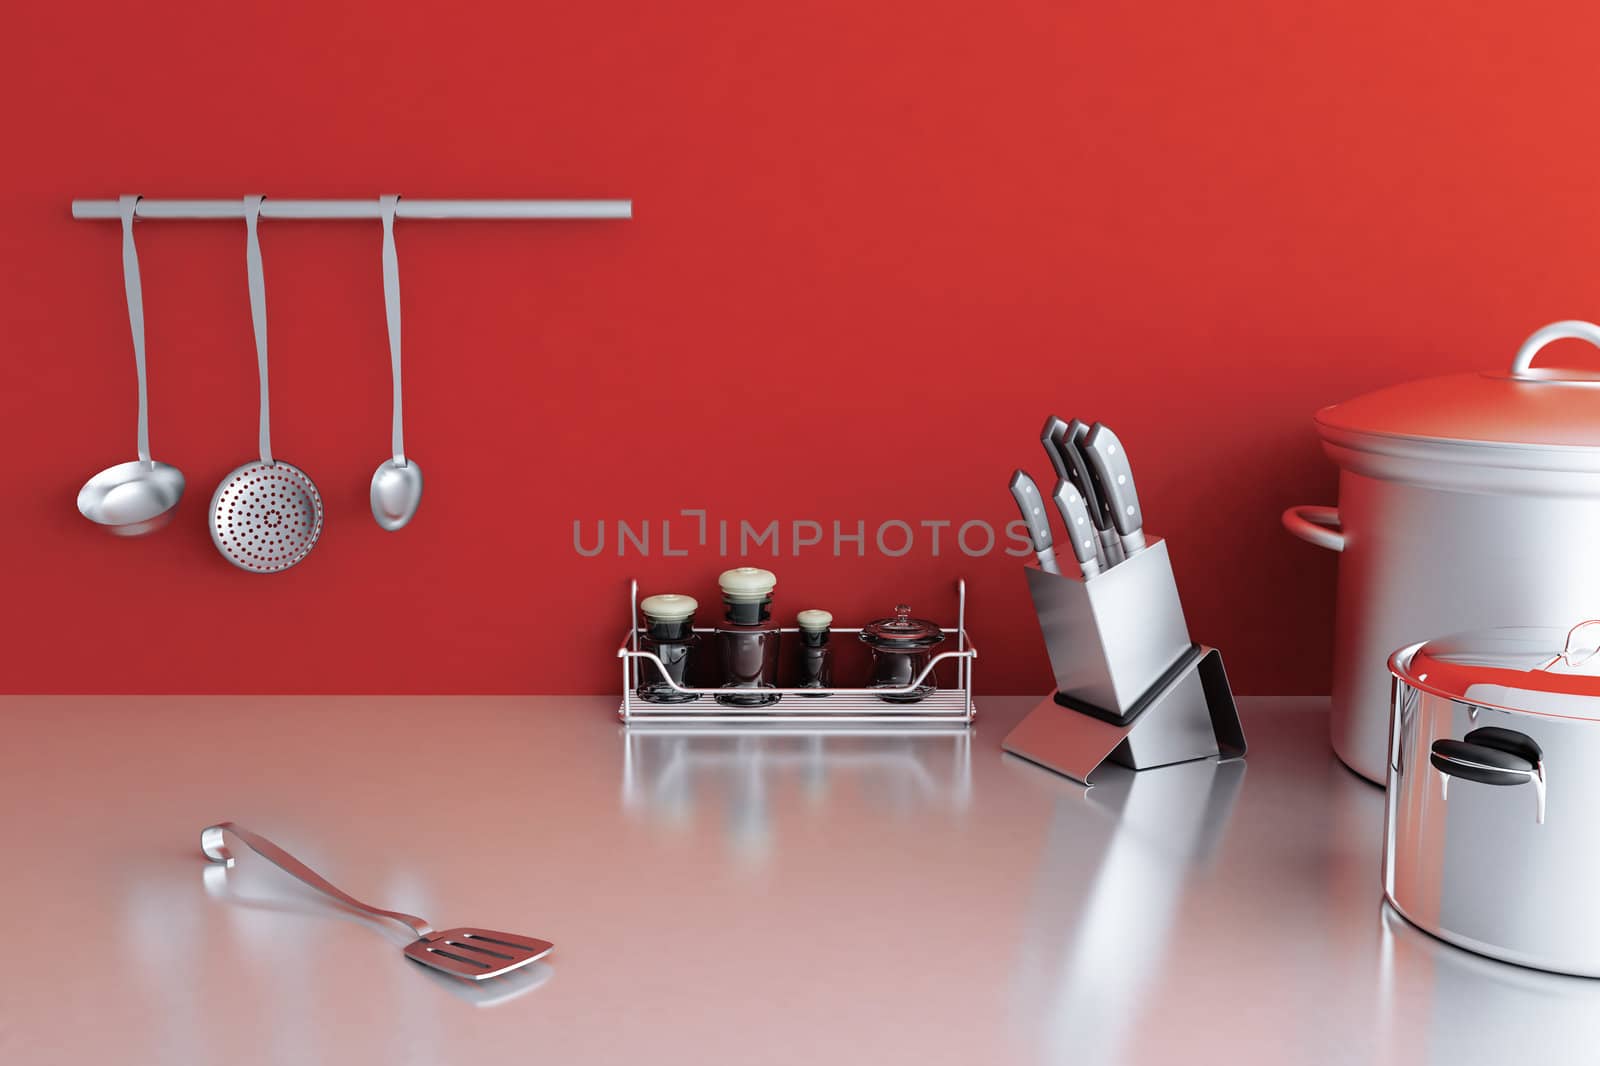 metallic kitchenware on a background of red wall by Serp